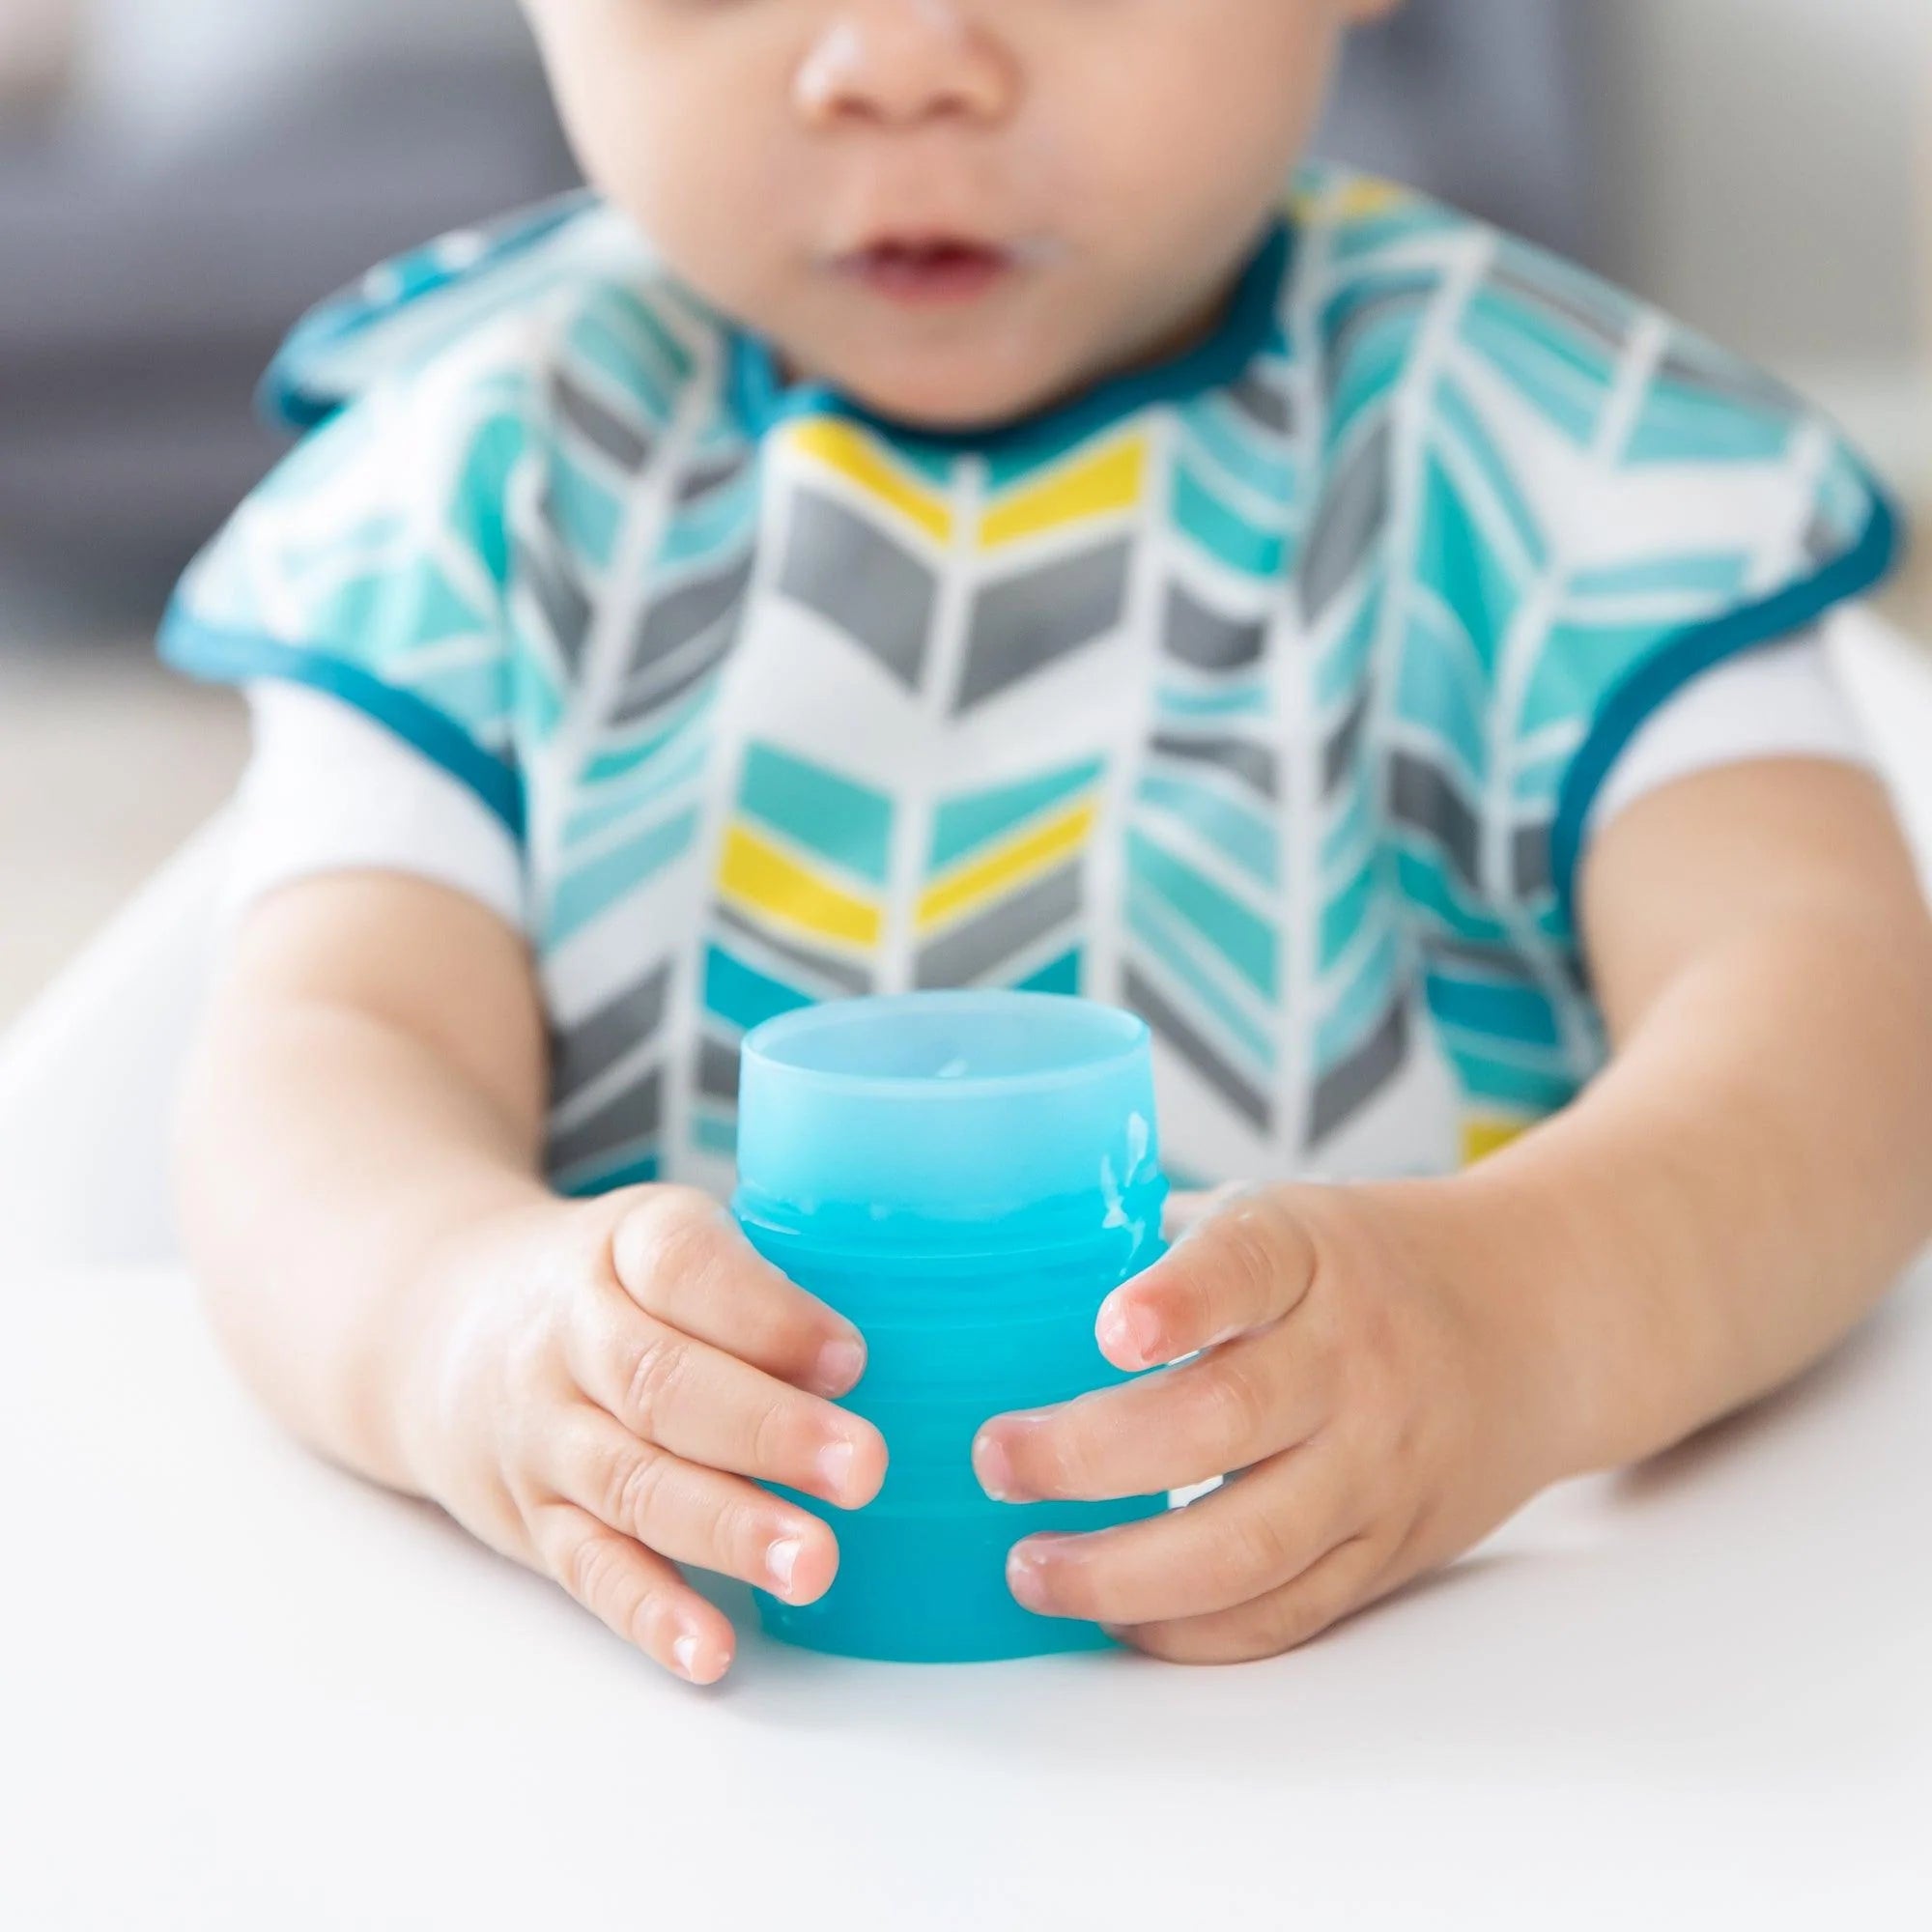 Reusable Cups for Iced Drink Snugs – Life's Little Things CO